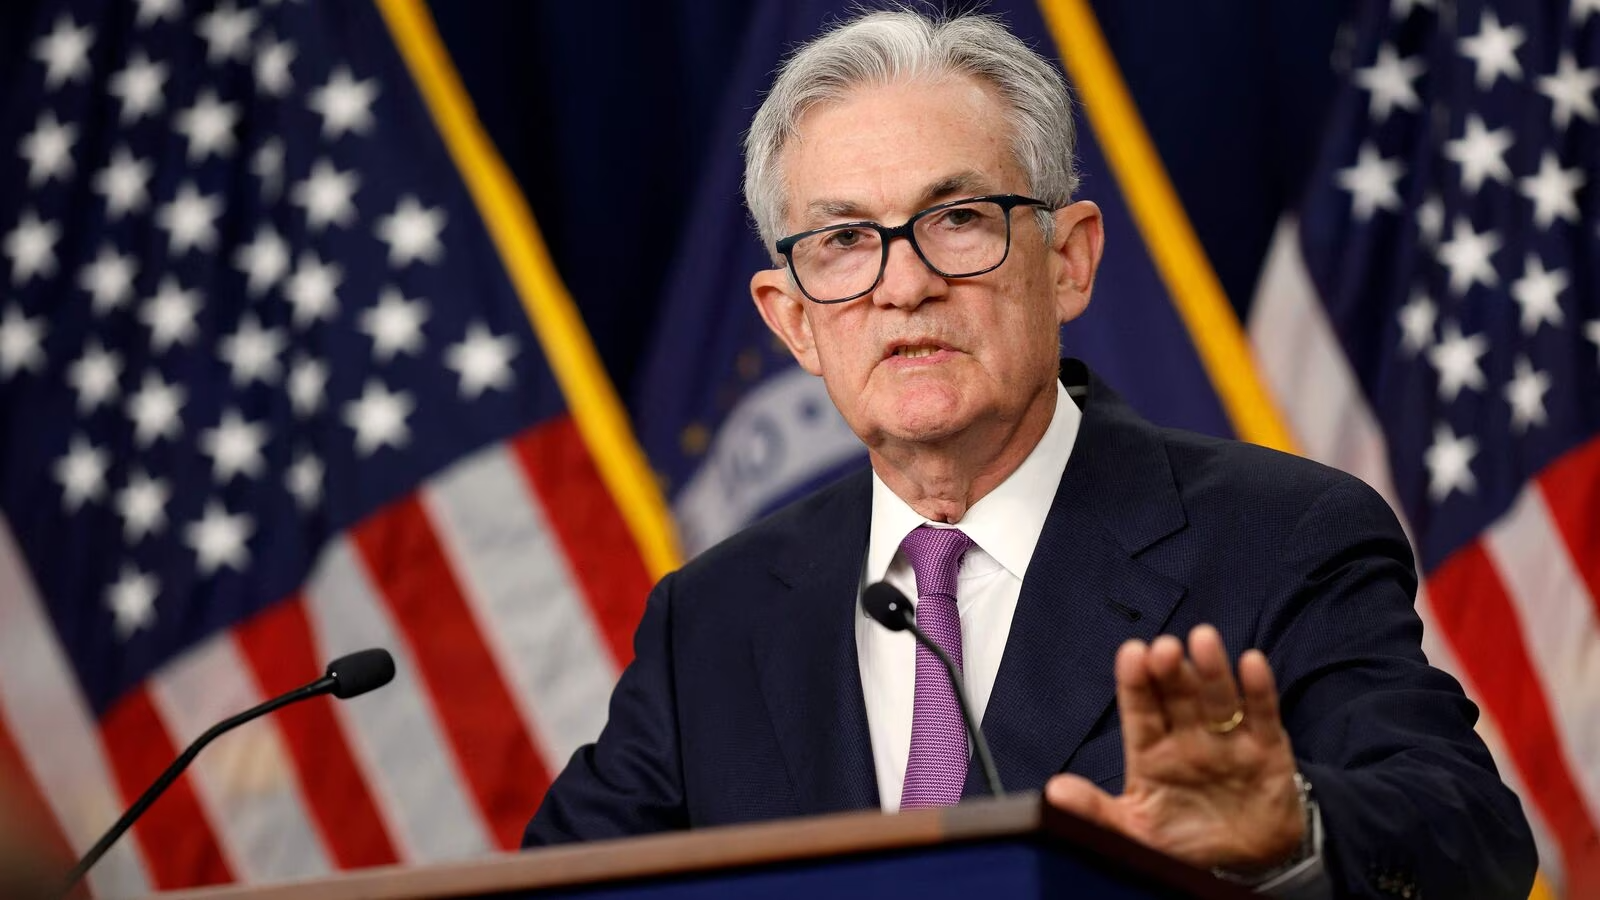 Stocks hit record highs on news that the Fed maintained its "three rate cuts this year" outlook, while crypto markets rallied.